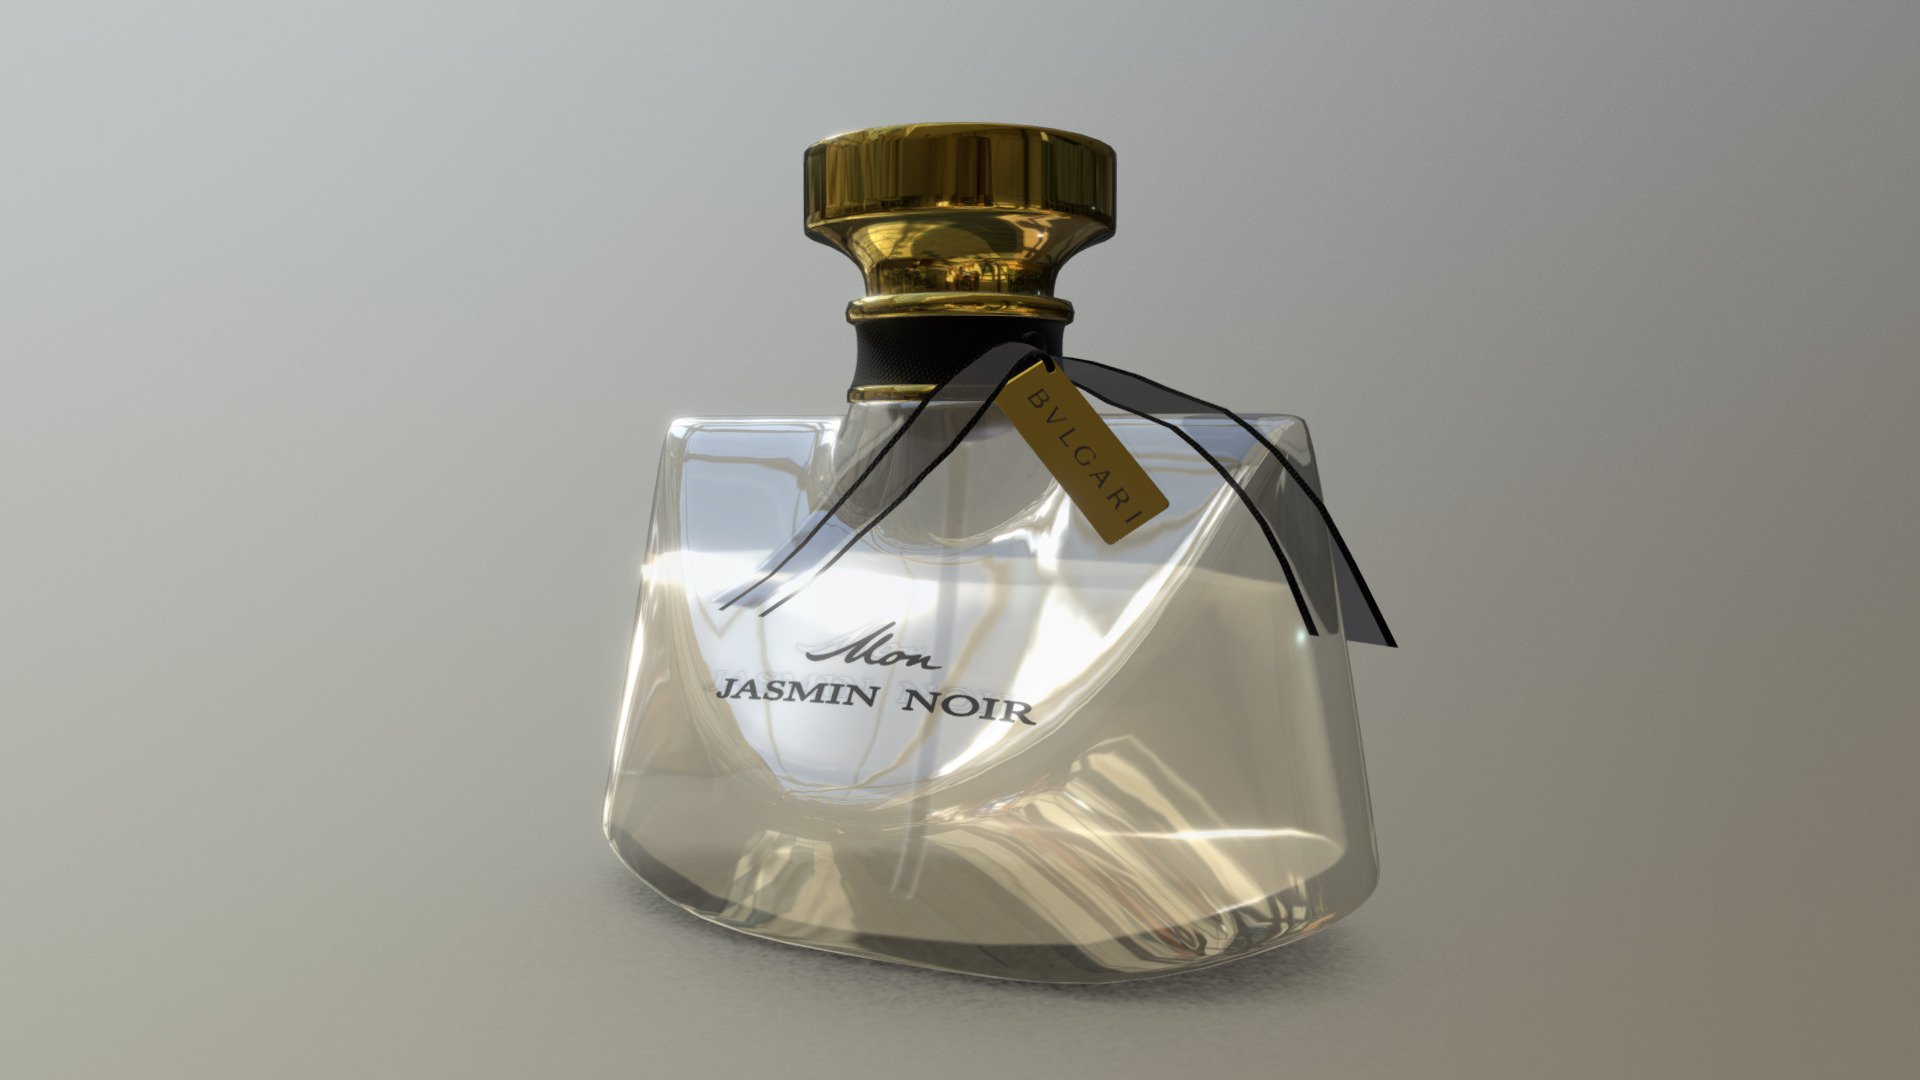 Mon Jasmin Noir is a feminine perfume by Bulgari, launched in 2011.The fragrance was created by perfumers Olivier Polge and Sophie Labbé. 3D model in Blender 3d model